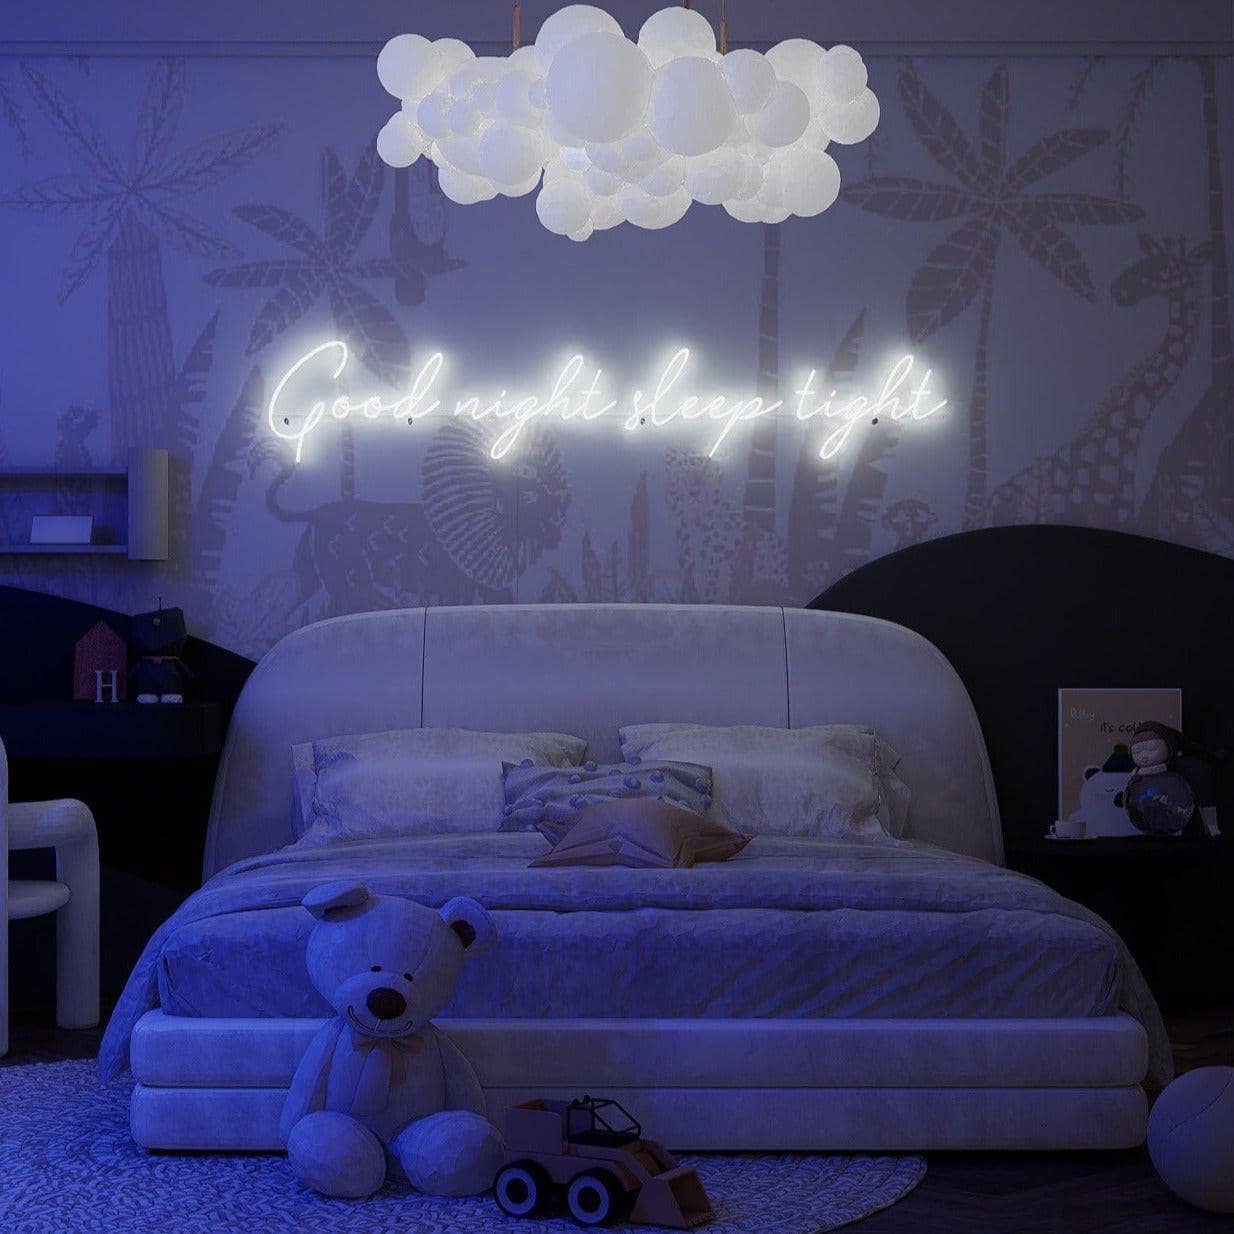 white-neon-picture-lit-up-at-night-for-display-on-the-wall-good-night-sleep-tight